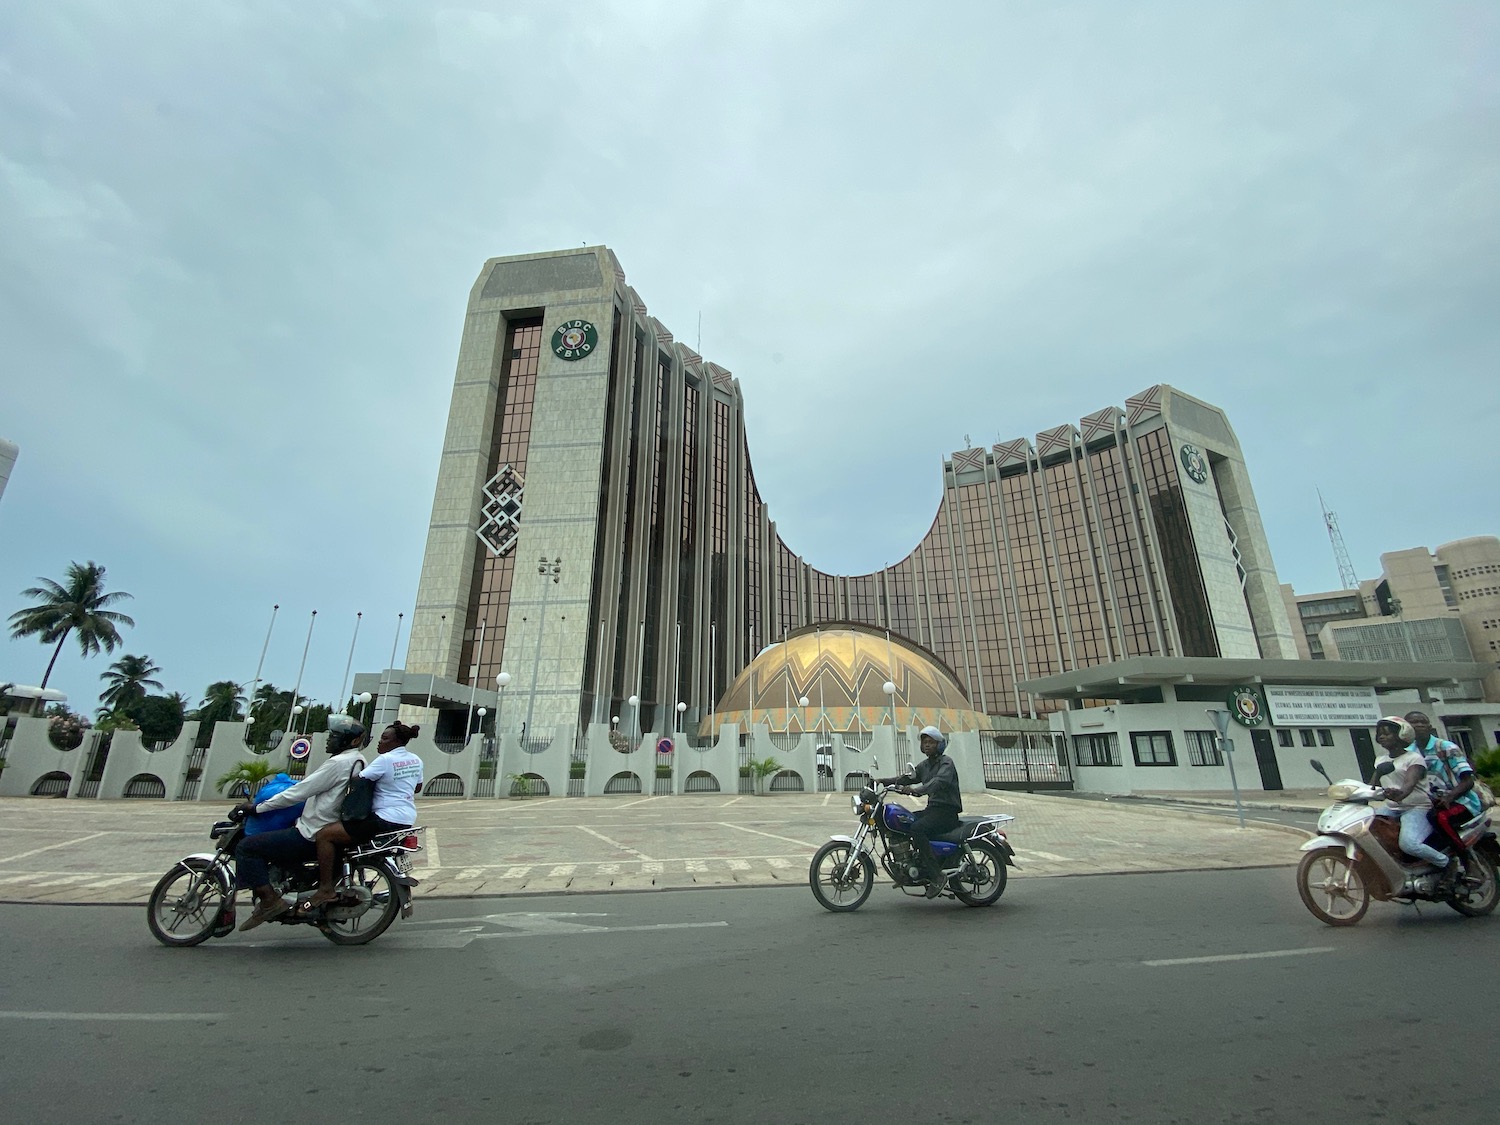 a group of people riding motorcycles in front of a large building